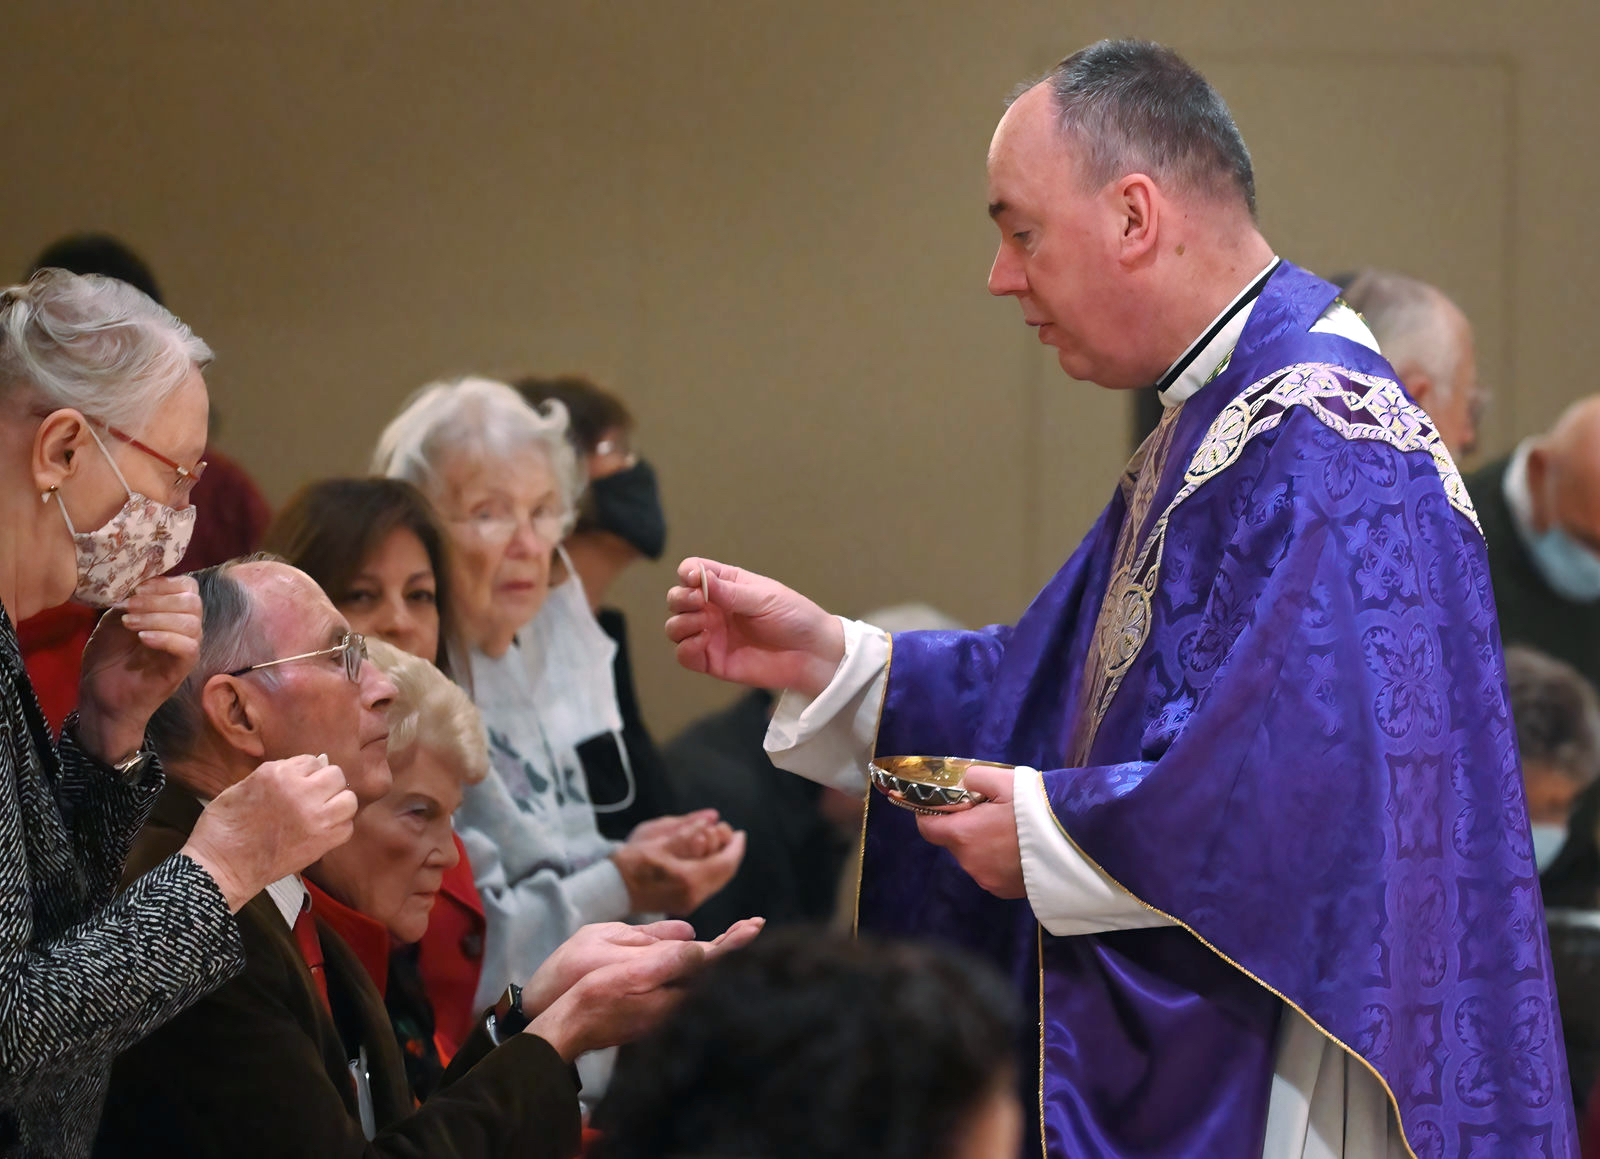 Diocese of Orange to baptize nearly 1,000 people in annual Easter vigil